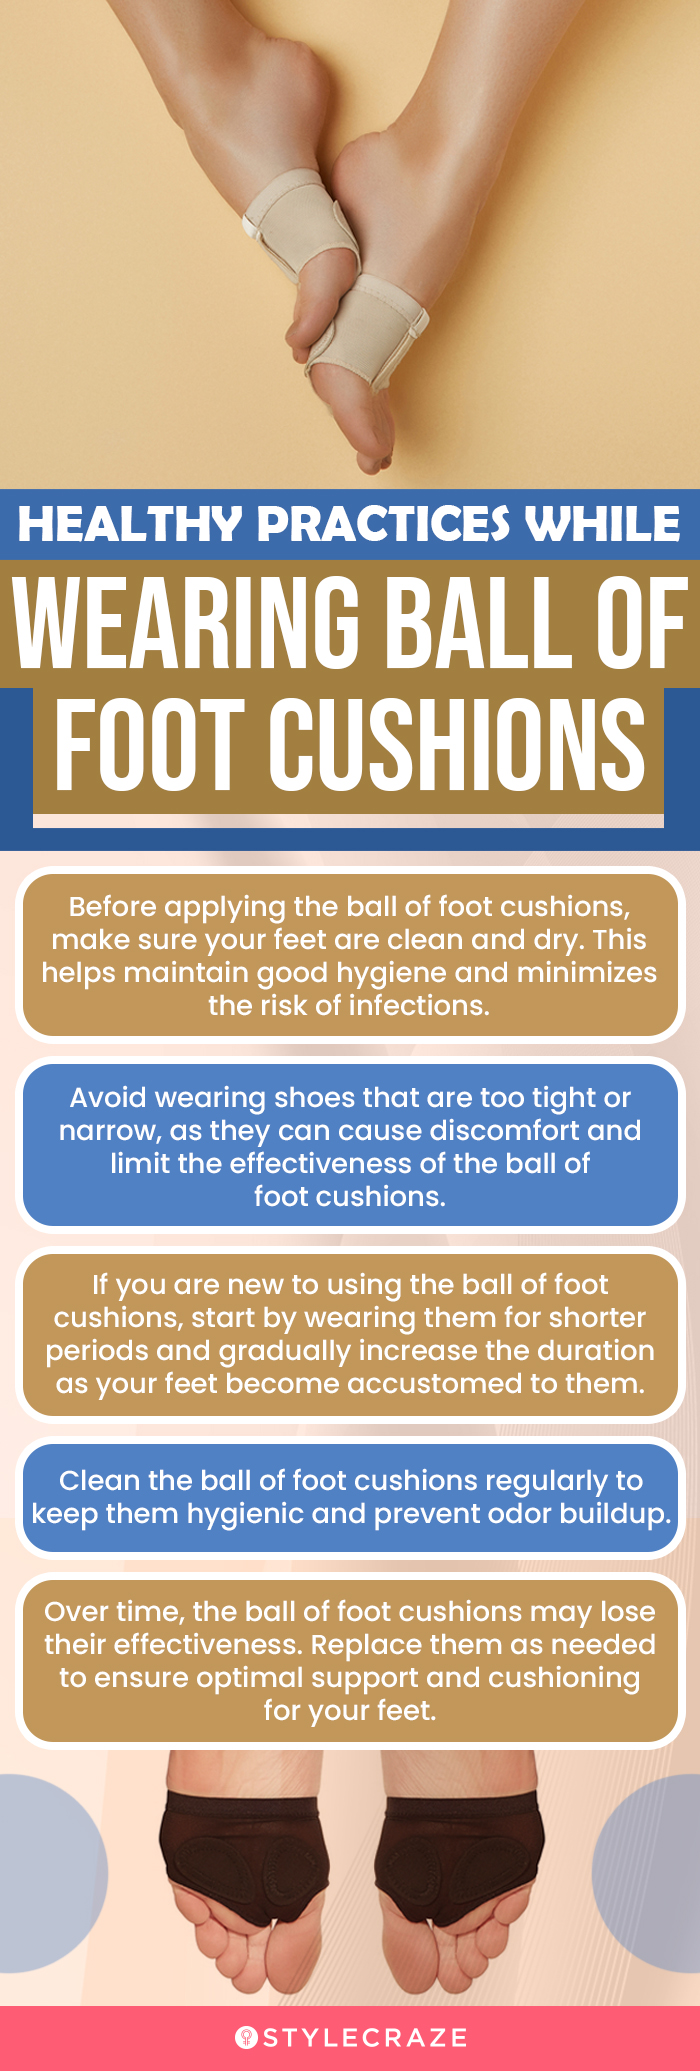 Healthy Practices While Wearing Ball Of Foot Cushions (infographic)